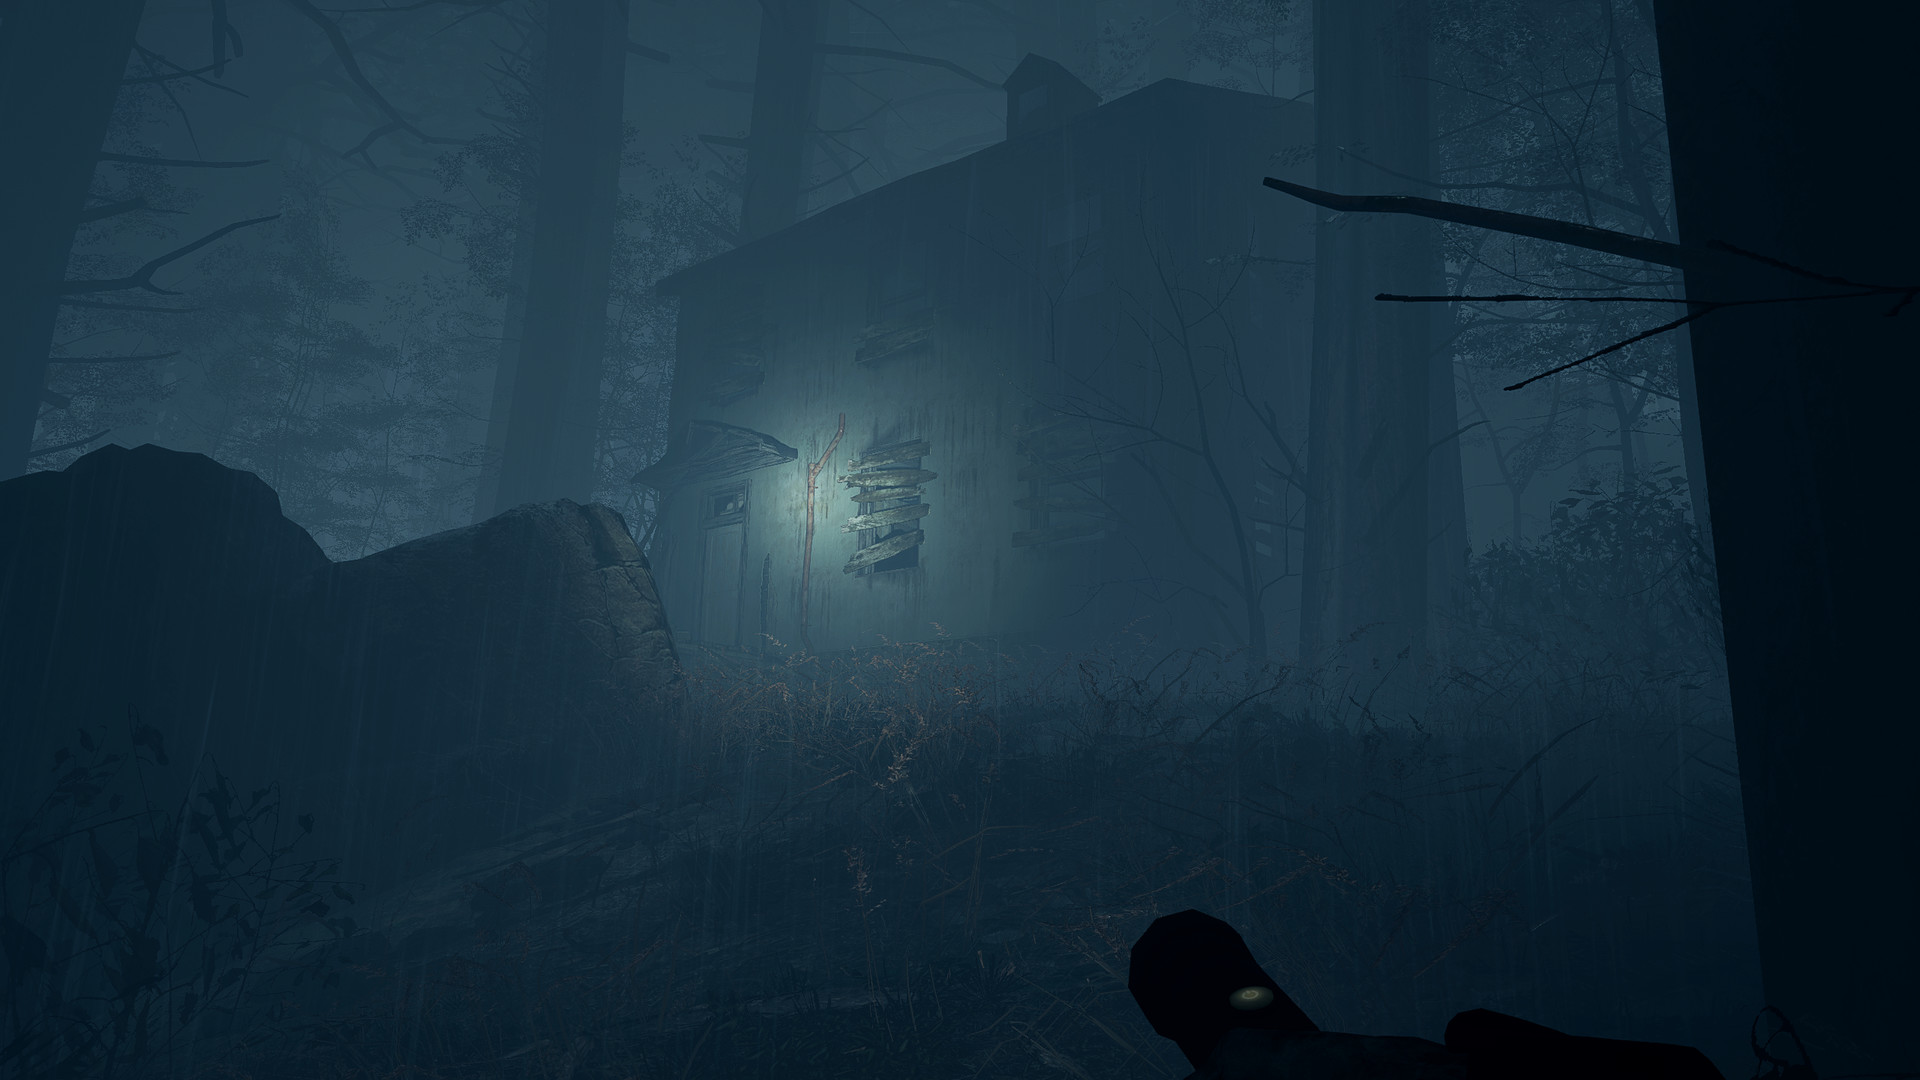 Blair Witch VR Free Download